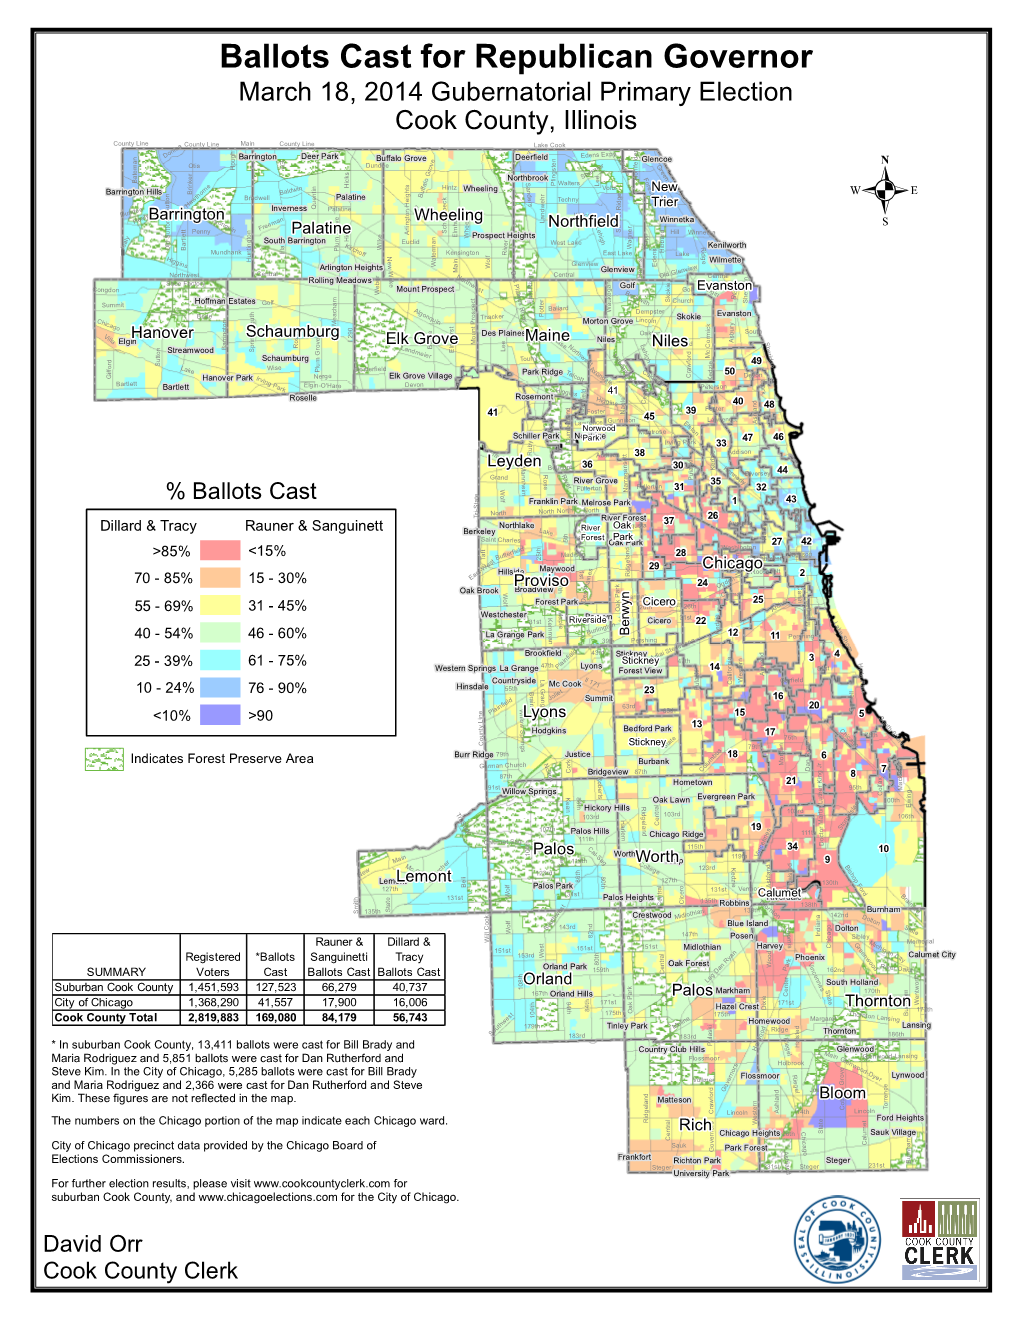 Ballots Cast for Republican Governor March 18, 2014 Gubernatorial Primary Election Cook County, Illinois County Line Main Count a County Line Y Line Lake Cook Le R